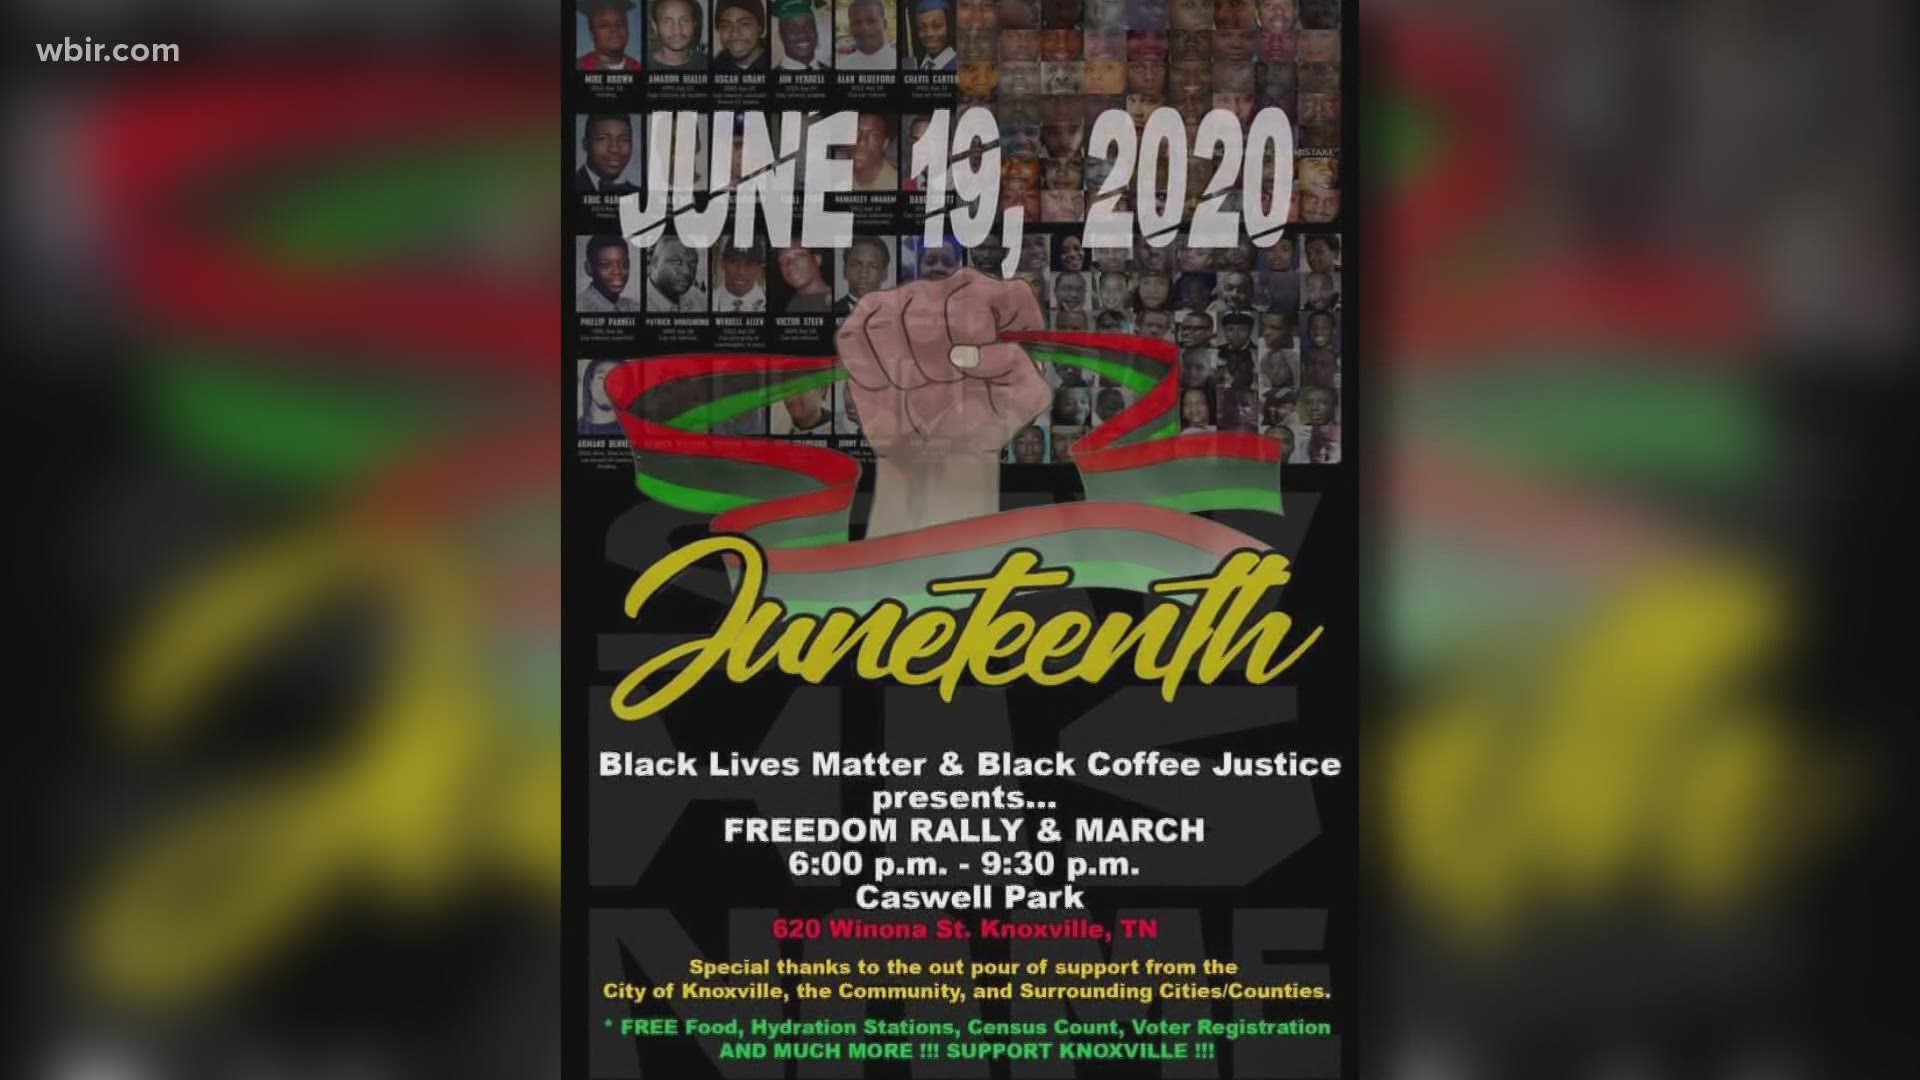 The 155-year history of Juneteenth holds a lot of meaning in the ongoing fight for equality.